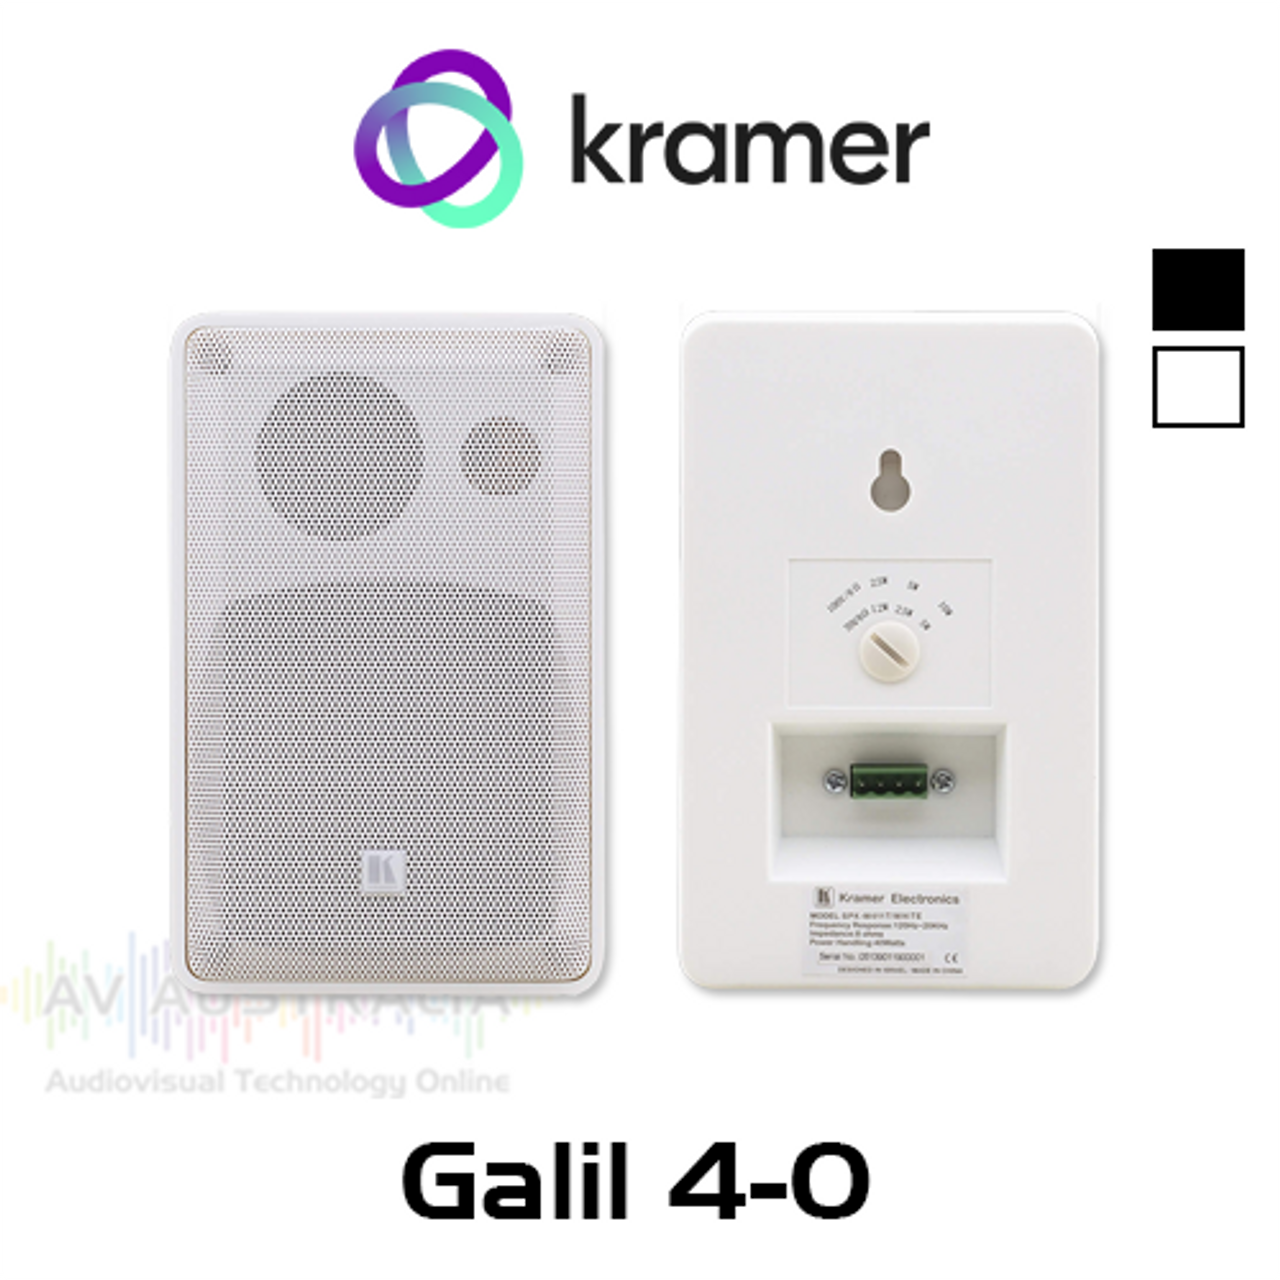 Kramer Galil 4-O 4" 70/100V On Wall Compact Speakers (Pair)